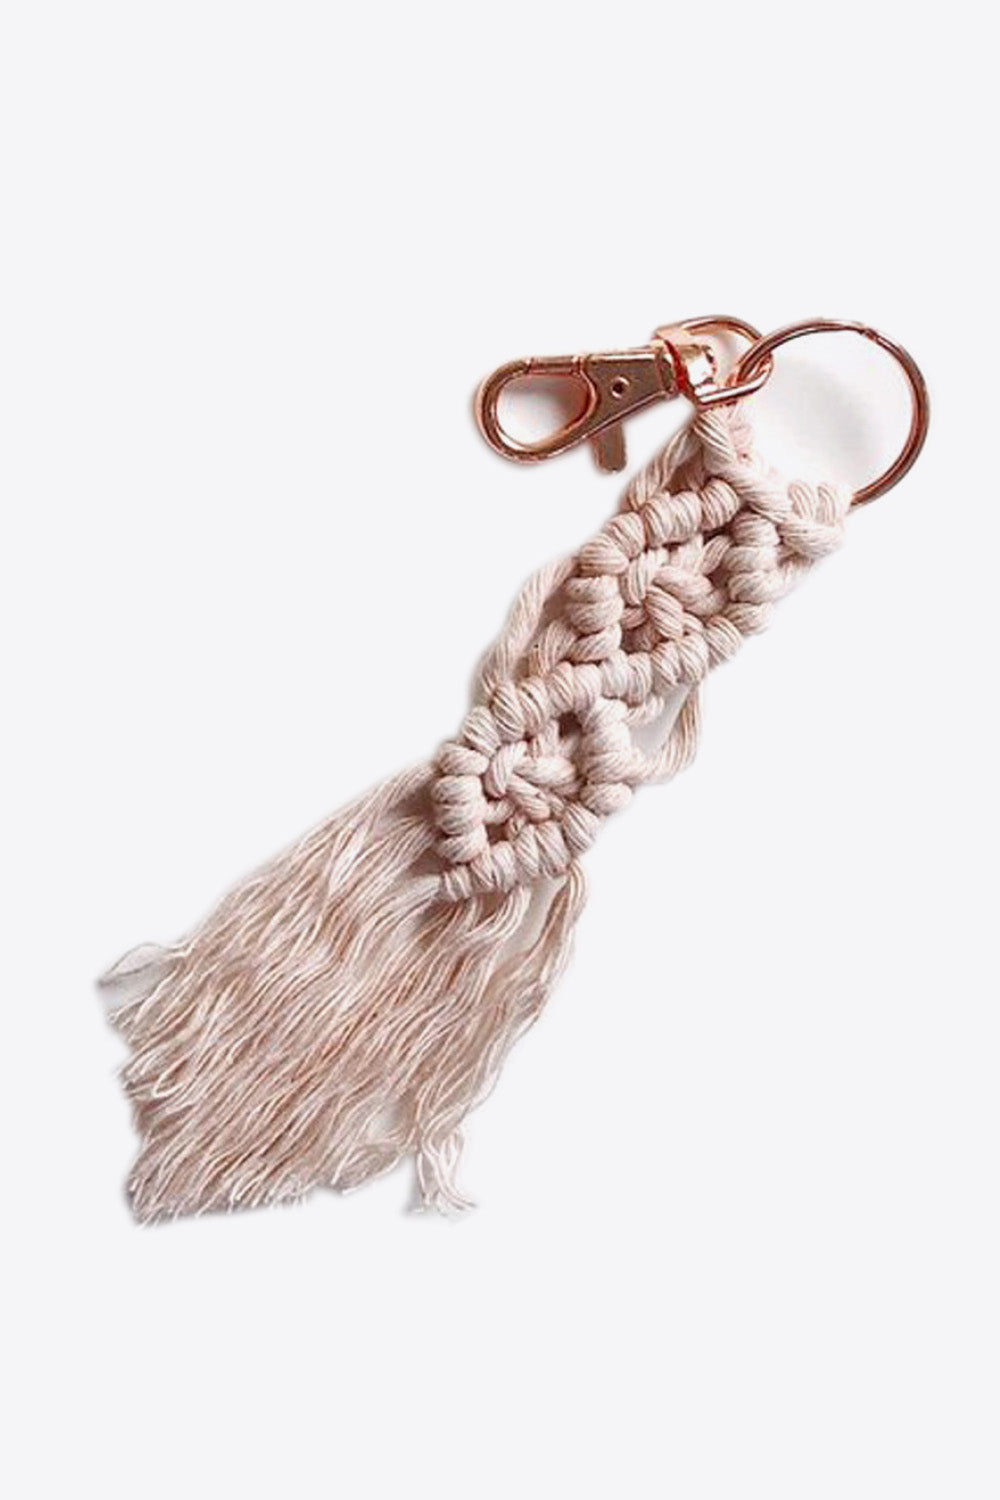 Trendsi Cupid Beauty Supplies Light Apricot / One Size Keychains Assorted 4-Pack Macrame Fringe Keychain